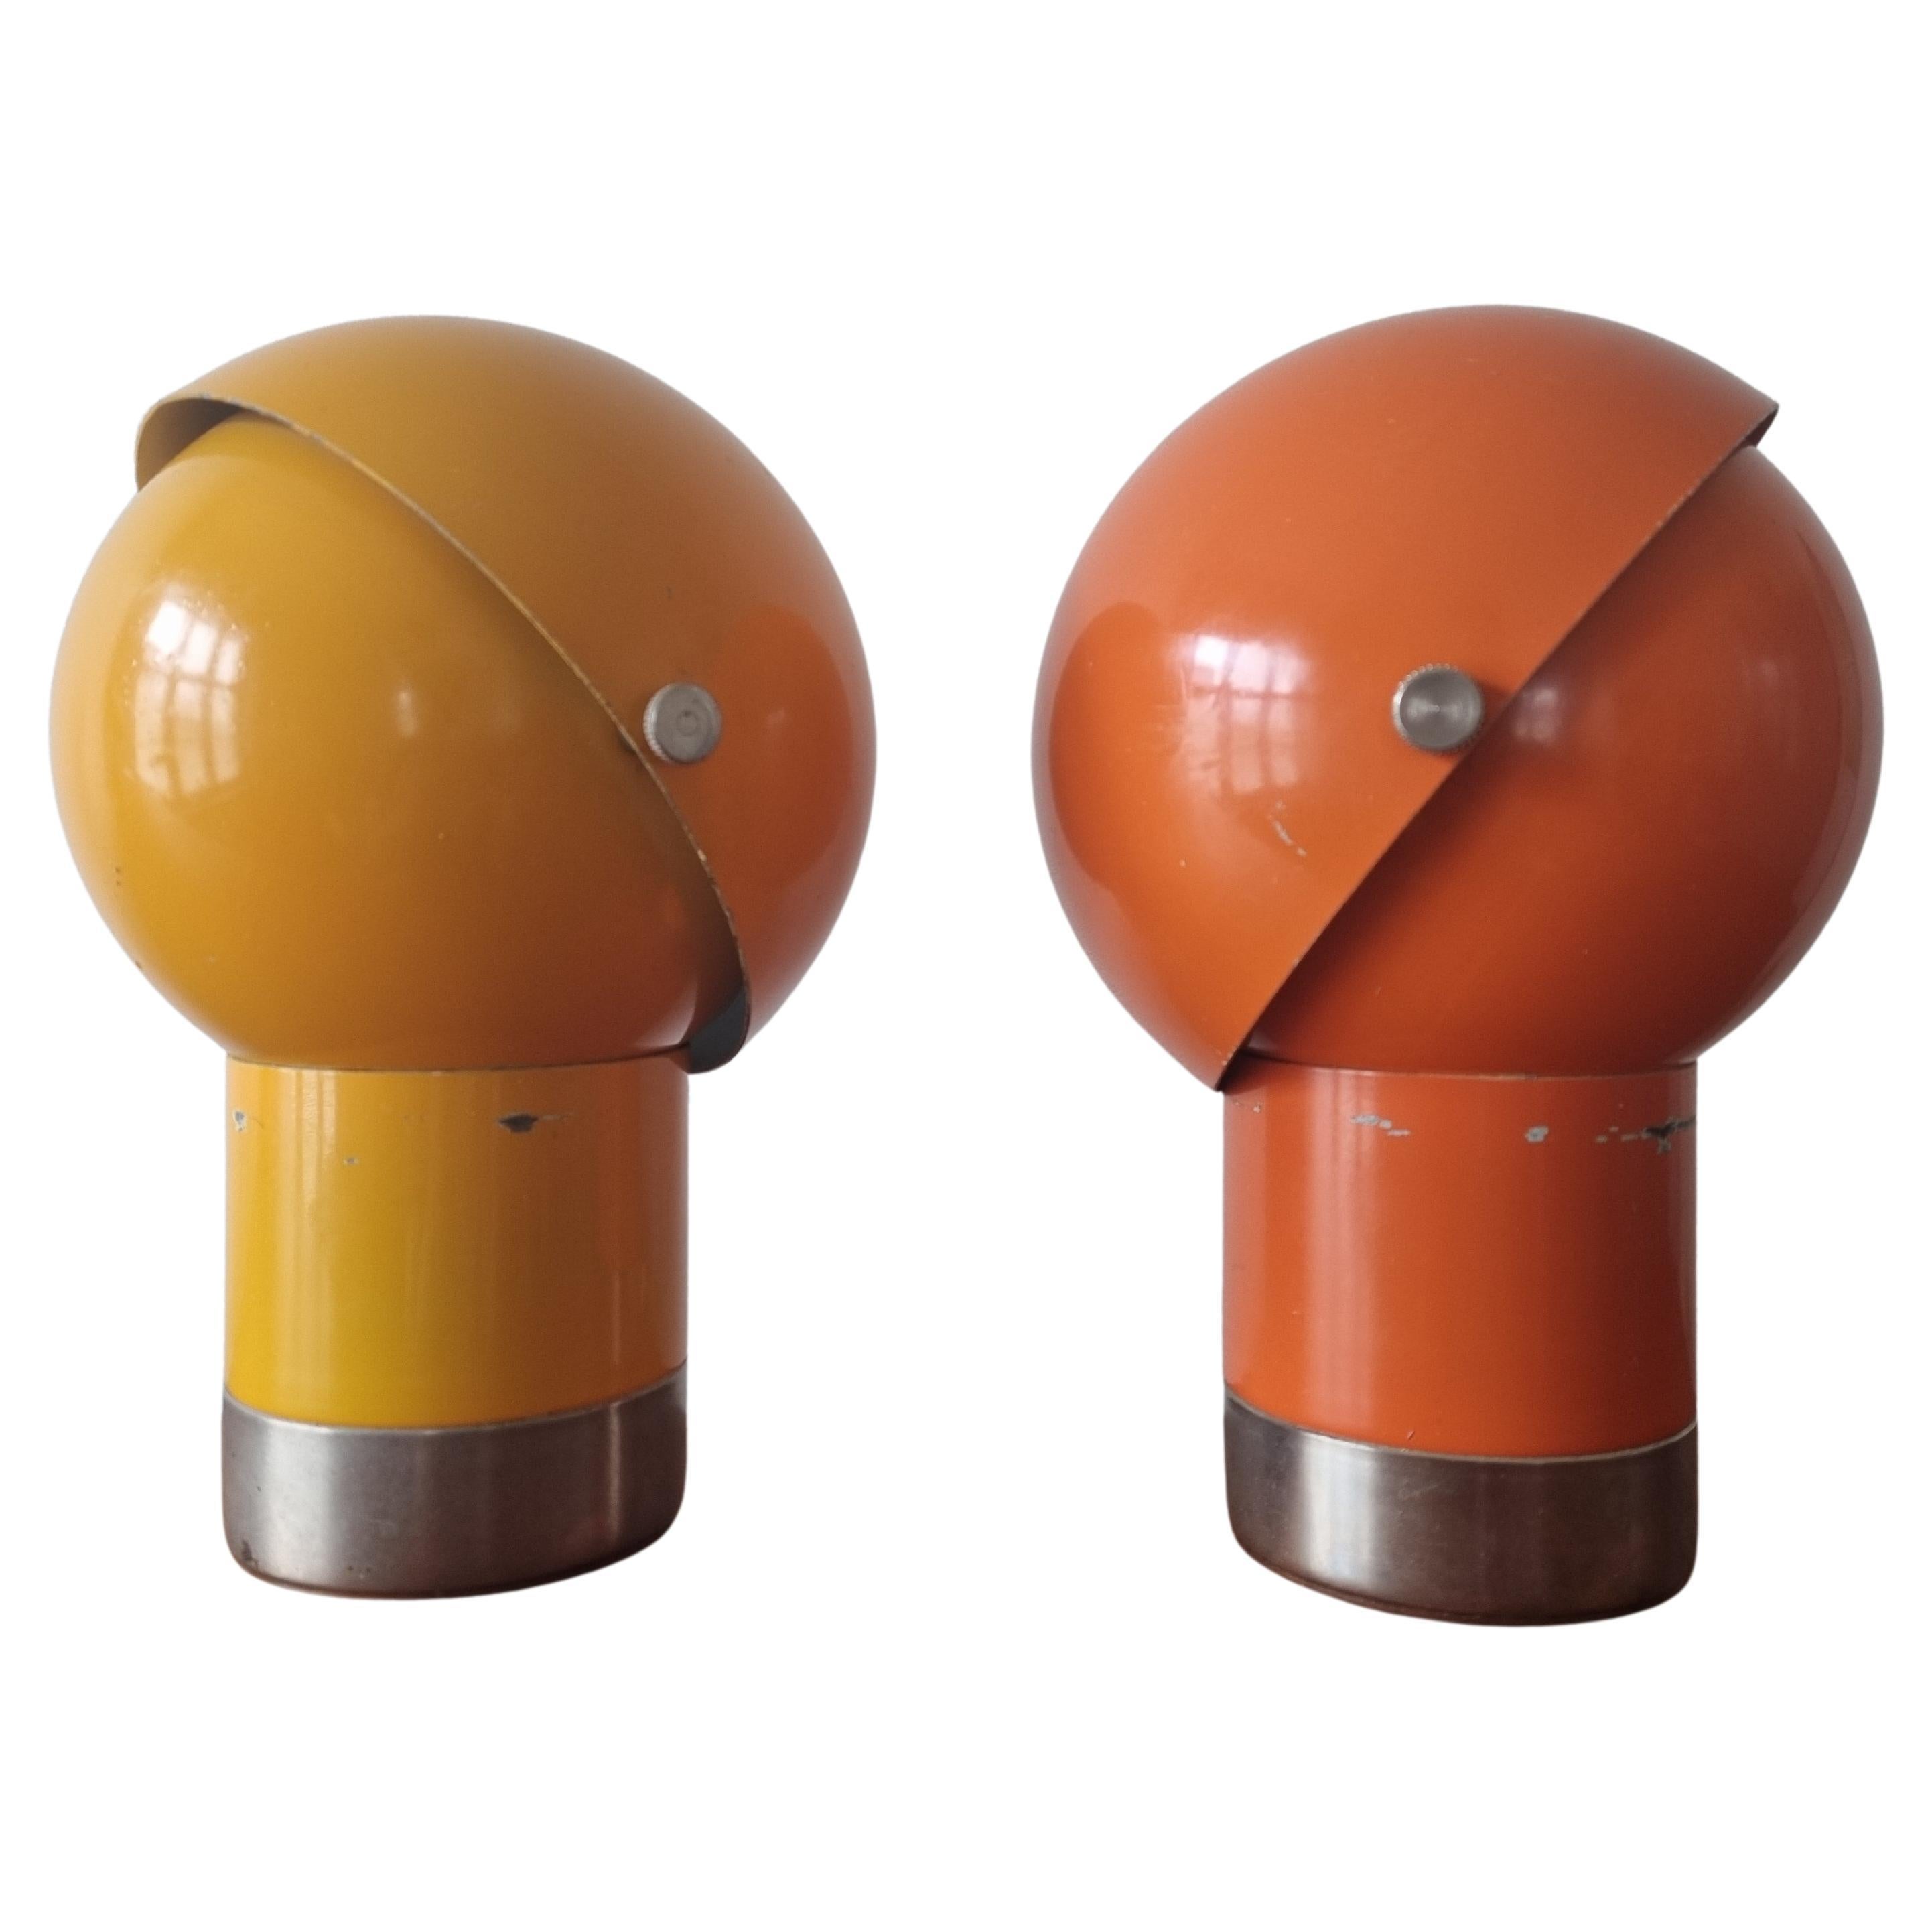 Mid-Century Modern Pair of Midcentury Table Lamps Astronaut, Space Age, 1970s